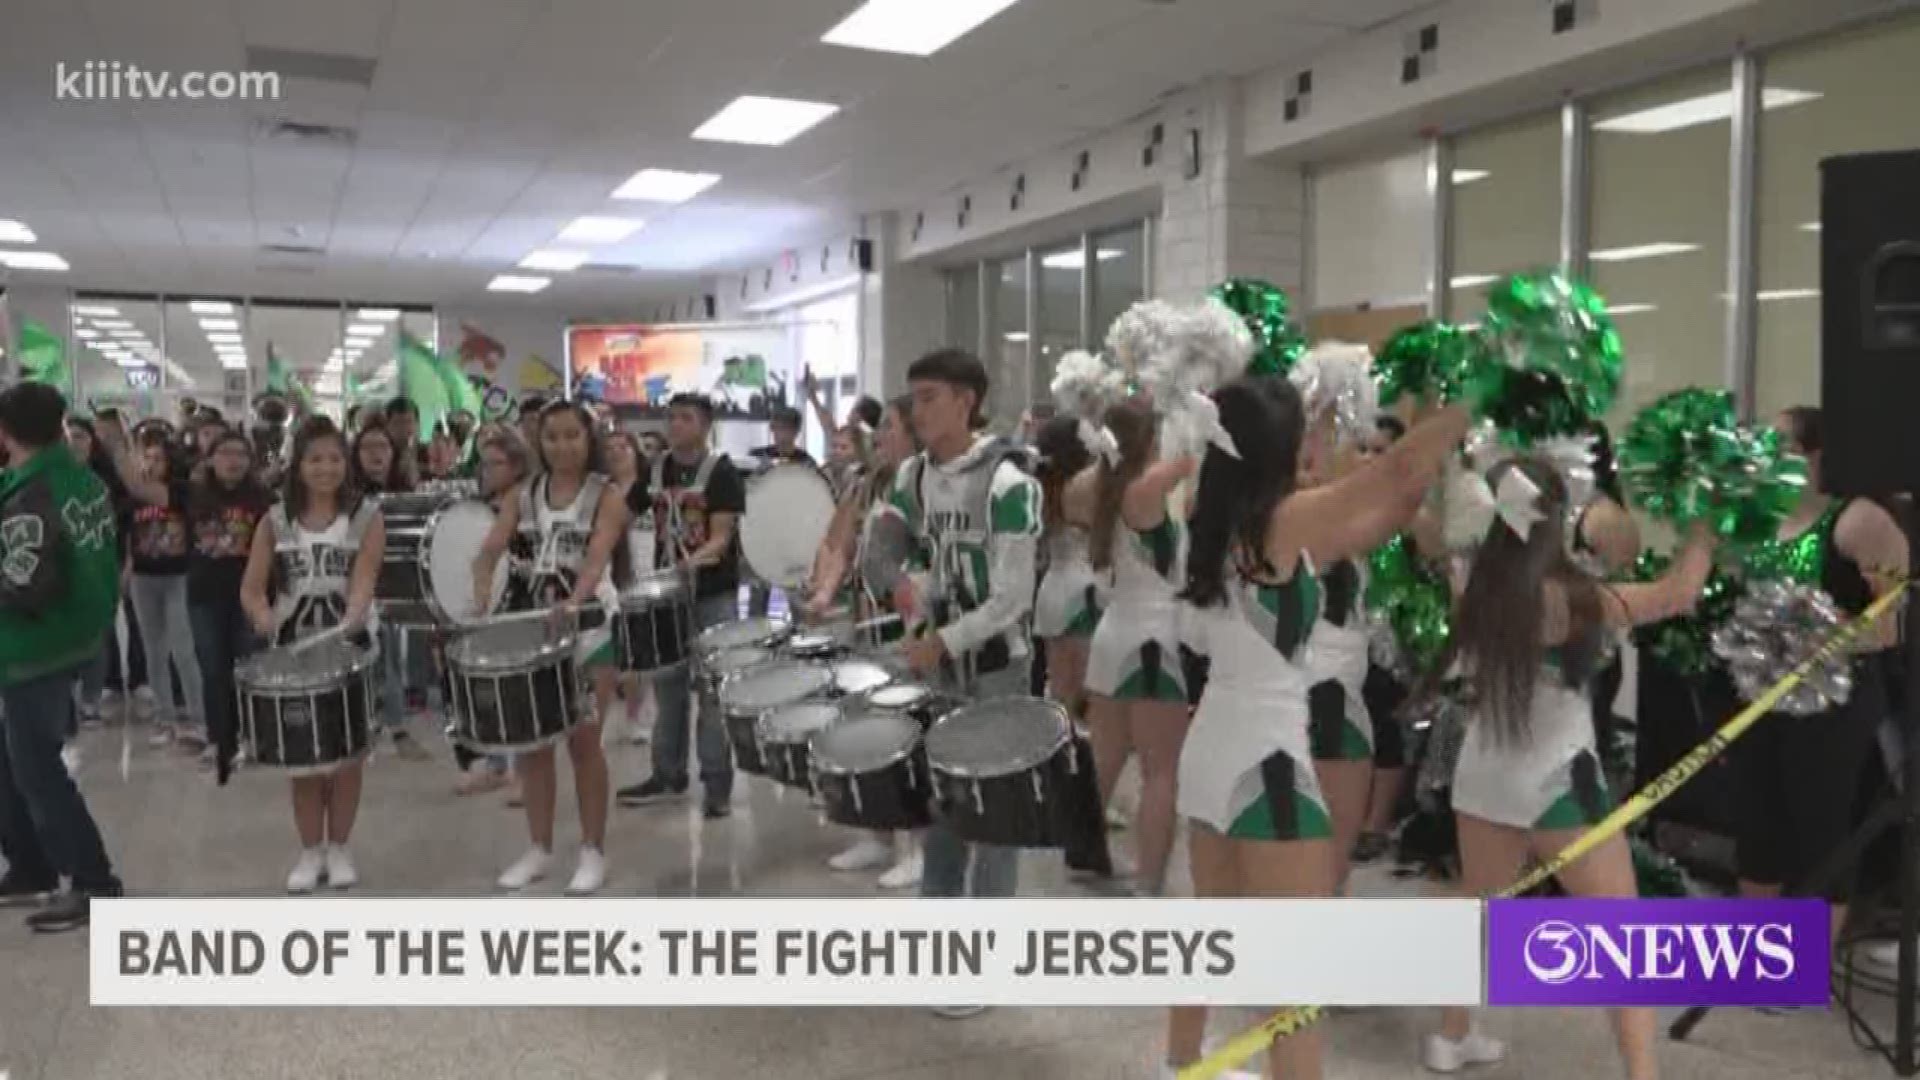 The Fightin' Jerseys band in Falfurrias, Texas, is hoping to become champions once again this school year.